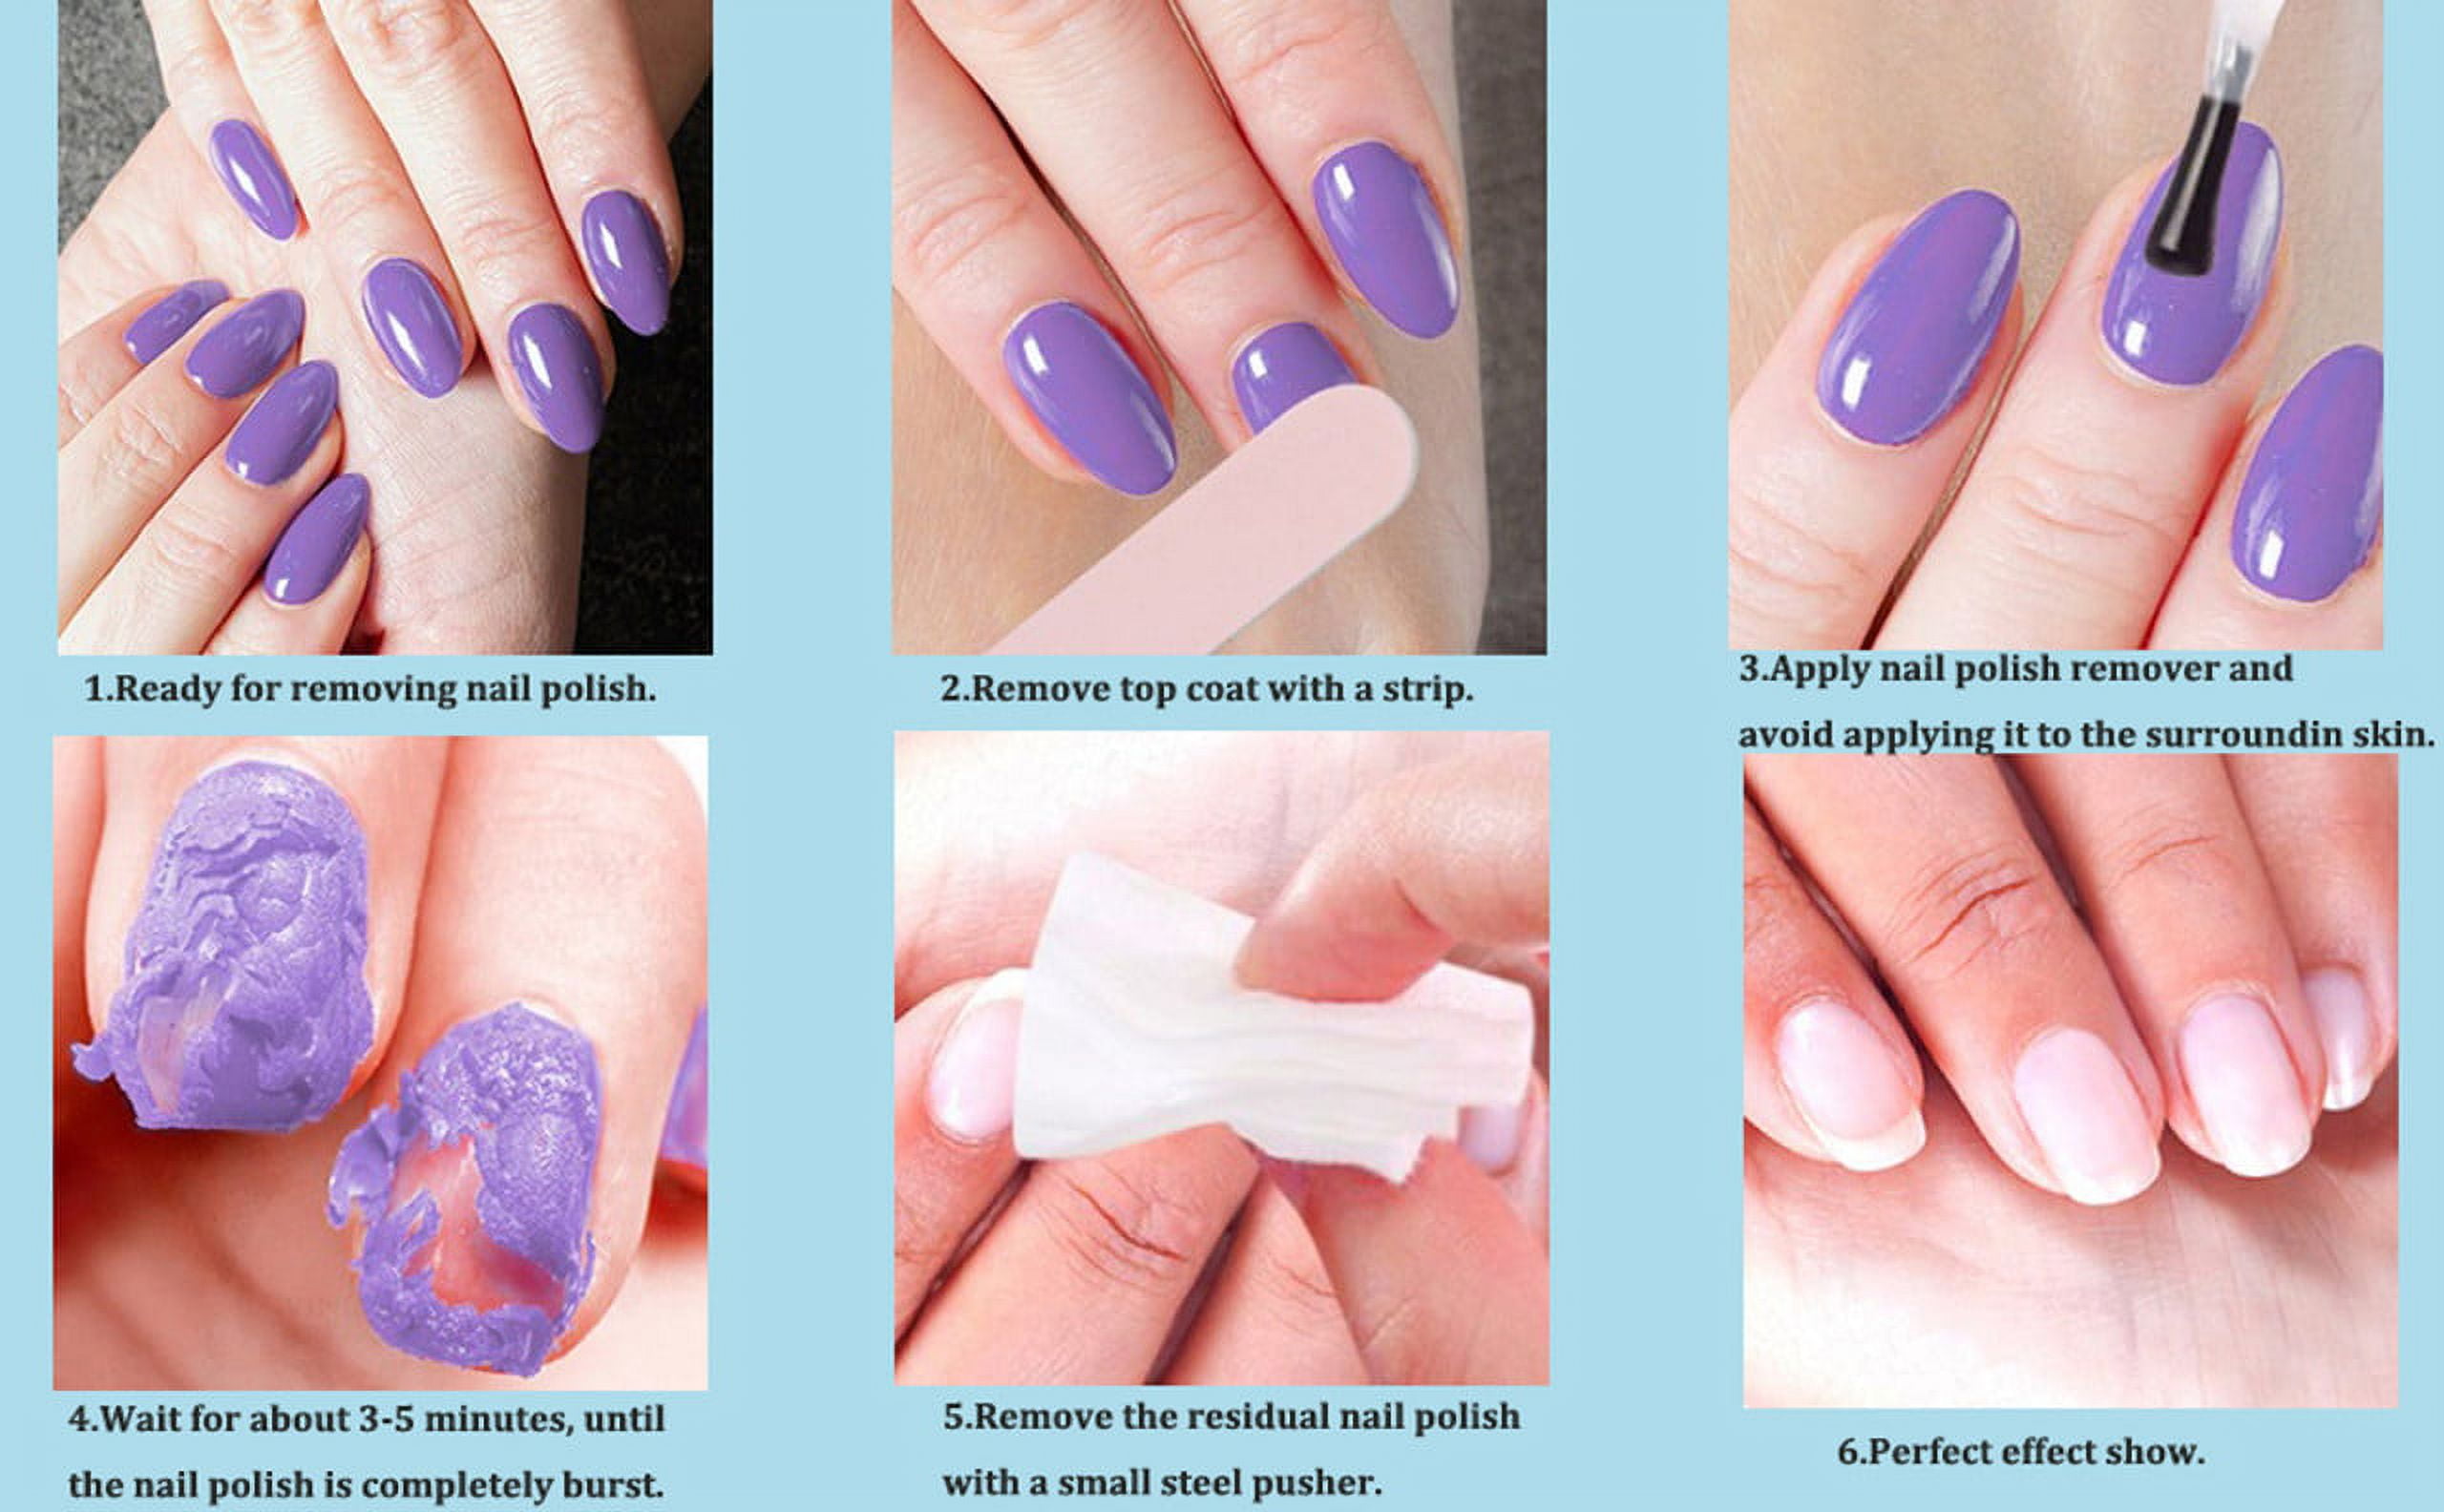 Can acrylic nails fall off on their own, like pop out? My mom won't let me  get them professionally taken off, neither use acetone. She says they'll  just fall off. - Quora